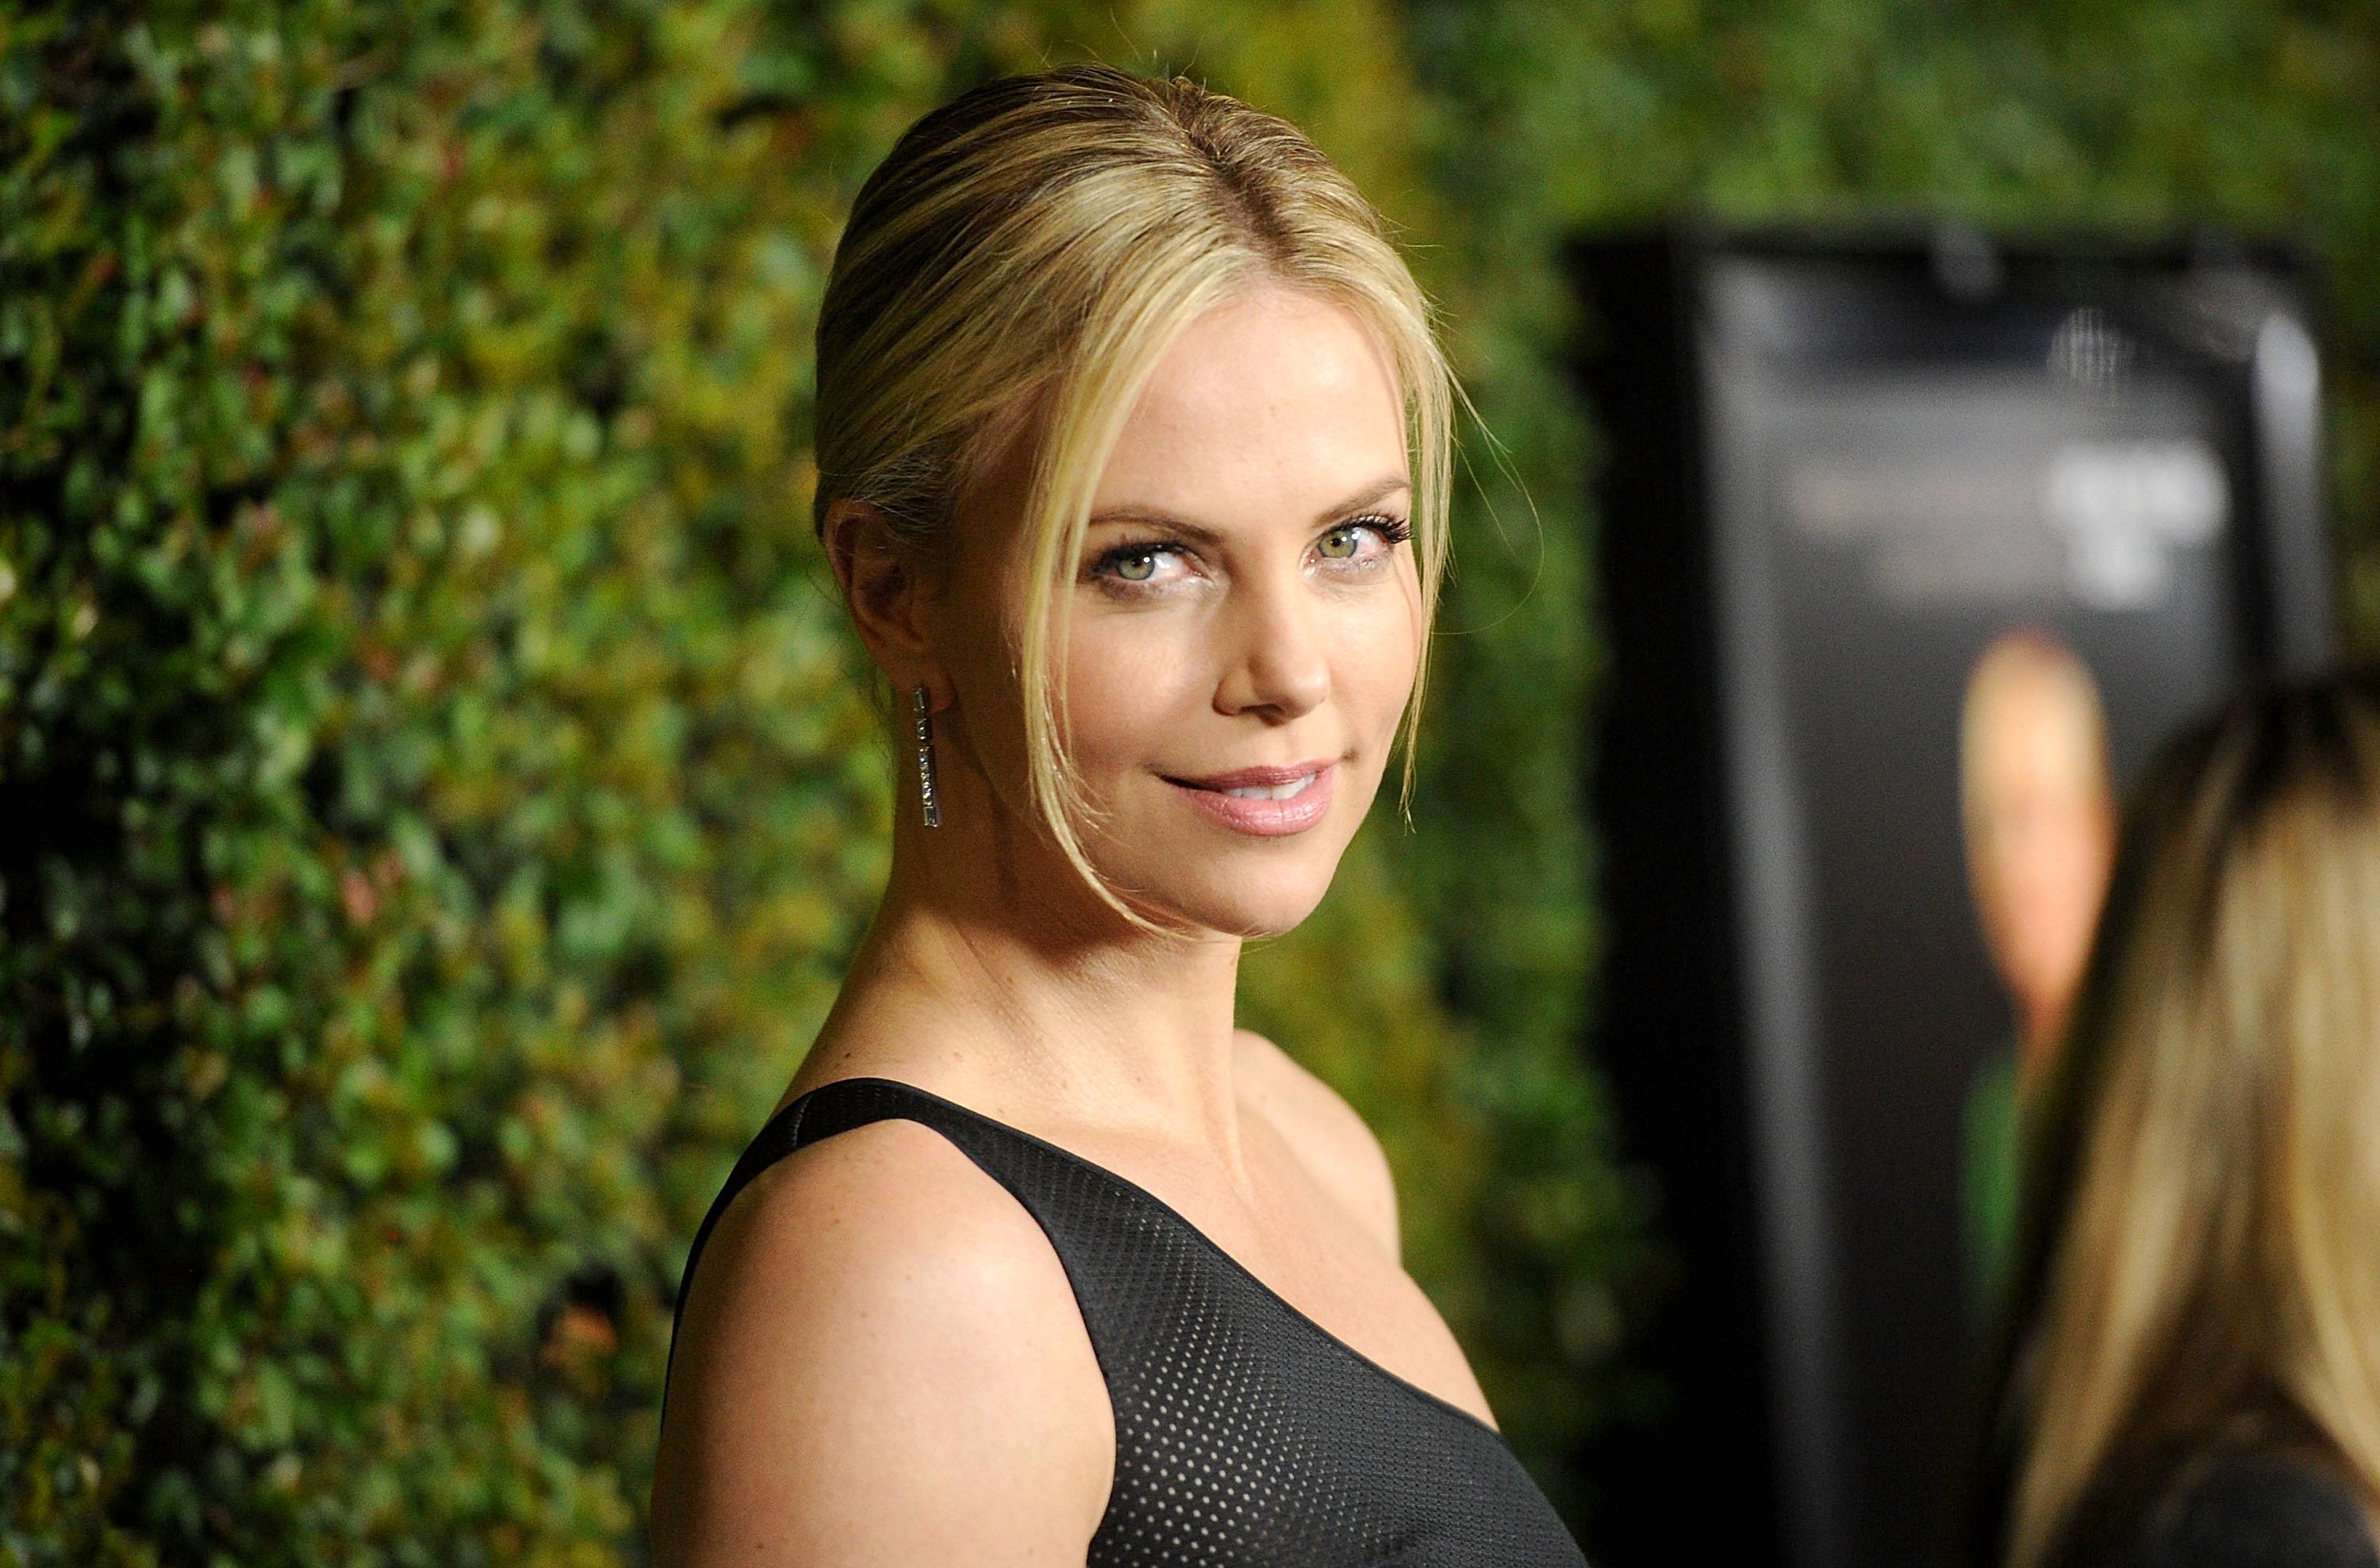 Charlize Theron - The Prometheus star didn't wait for a man to put a ring on it to start a family. Theron adopted son Jackson this March, admitting, &quot;I don't think my mom could wait anymore!&quot; Sounds like it will be a special Mother's Day for mom and grandma.(Photo: Jason Merritt/Getty Images)